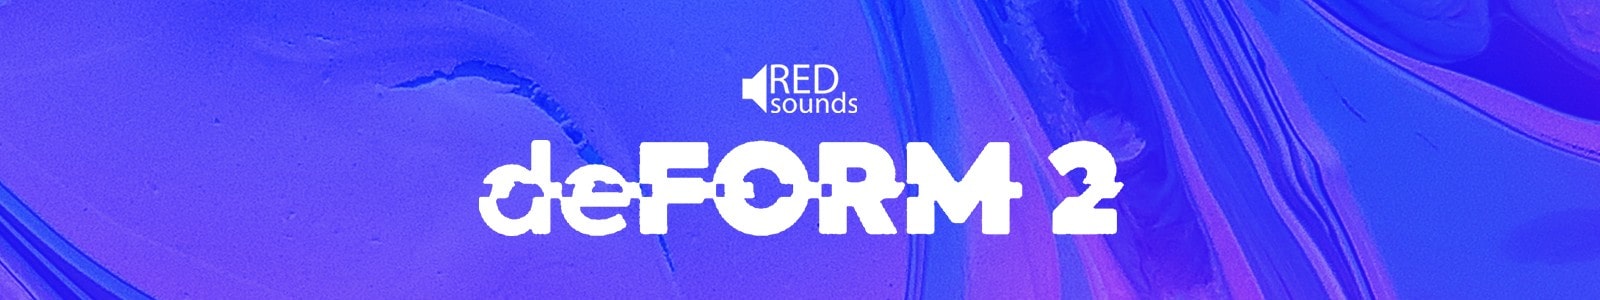 deForm 2 FX Plugin by Red Sounds